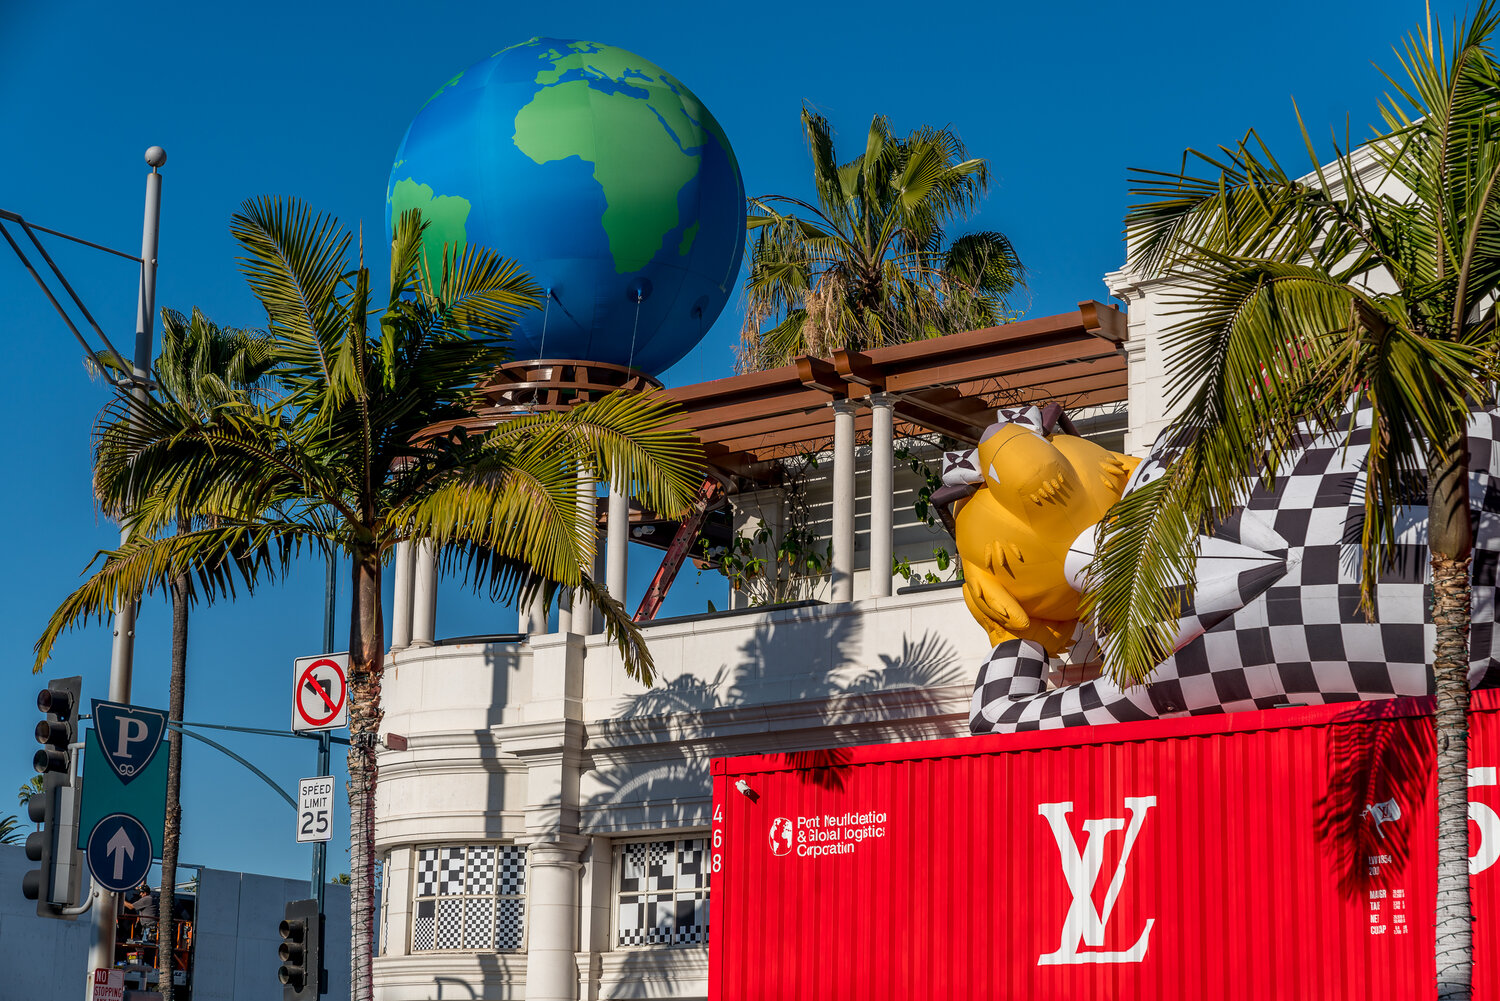 LOUIS VUITTON RODEO POP-UP — Stoelt Productions Experiential Marketing  Agency in Los Angeles